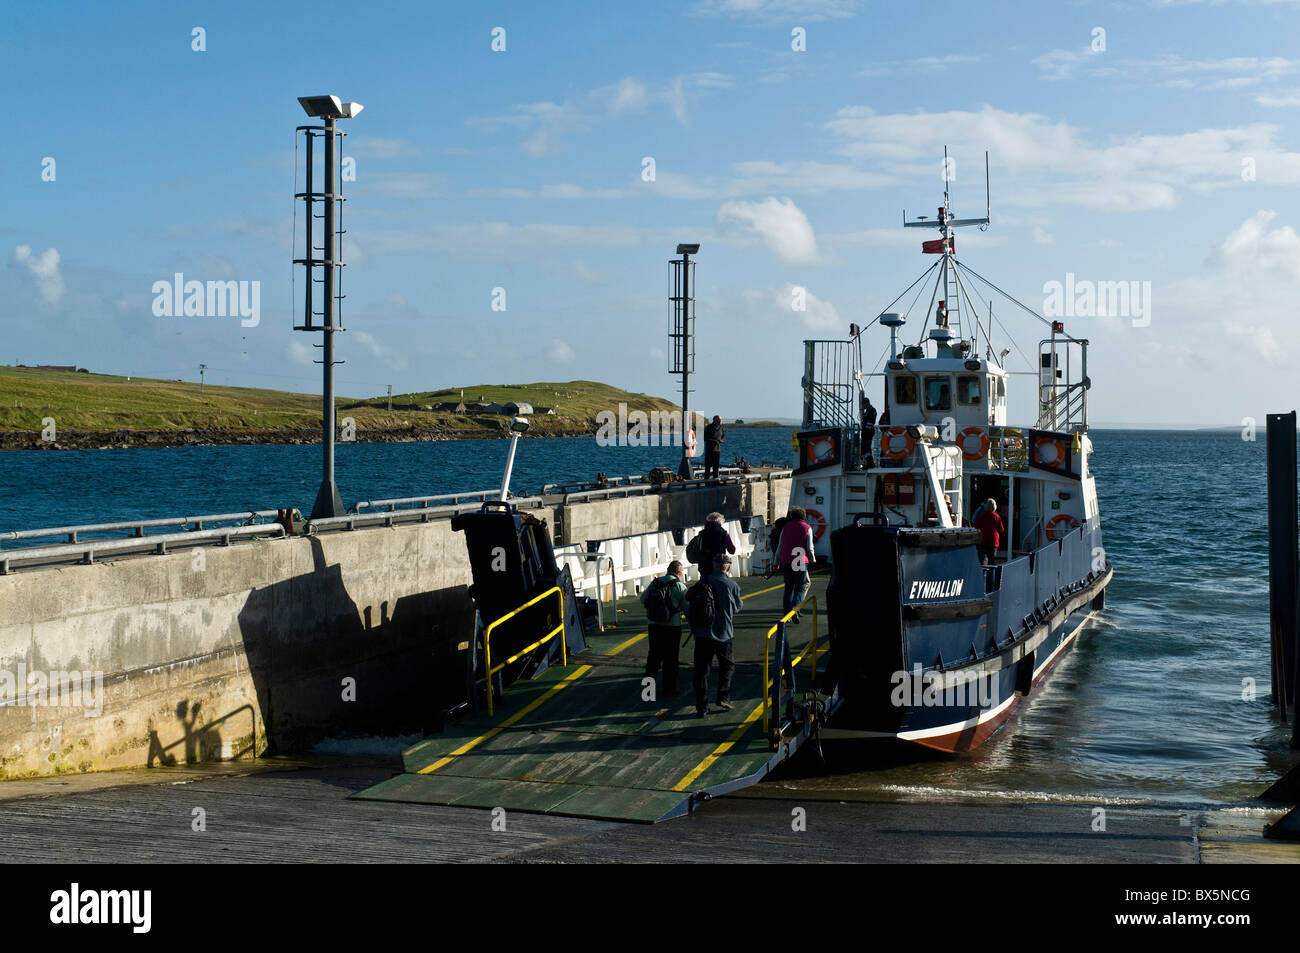 dh EGILSAY ORKNEY touristes attrapant Egilsay Rousay passagers ferry scottish People Island boat scotland Banque D'Images